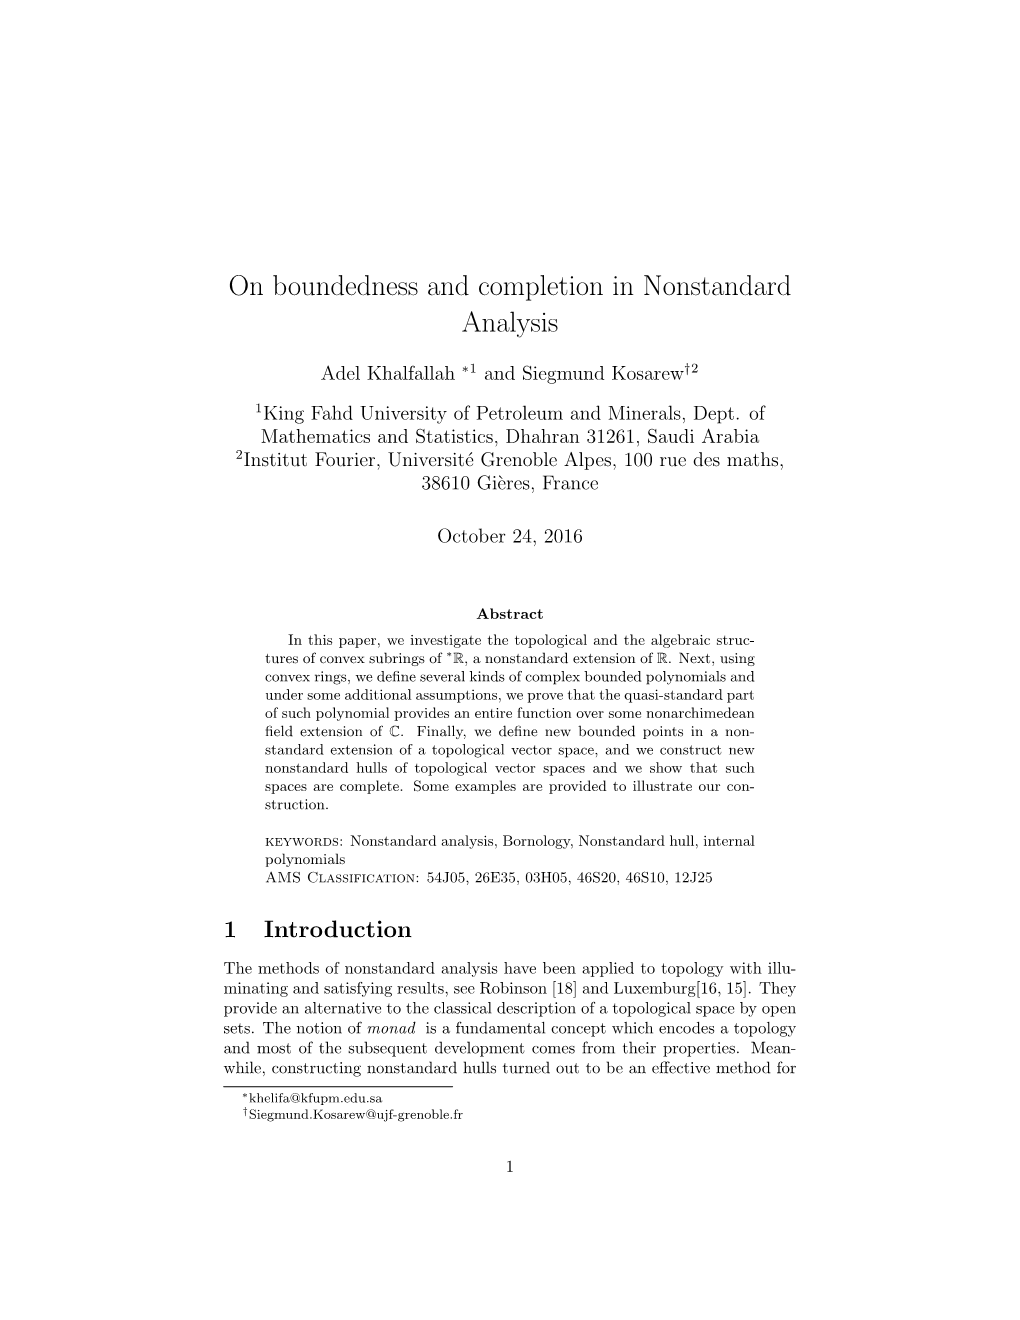 On Boundedness and Completion in Nonstandard Analysis